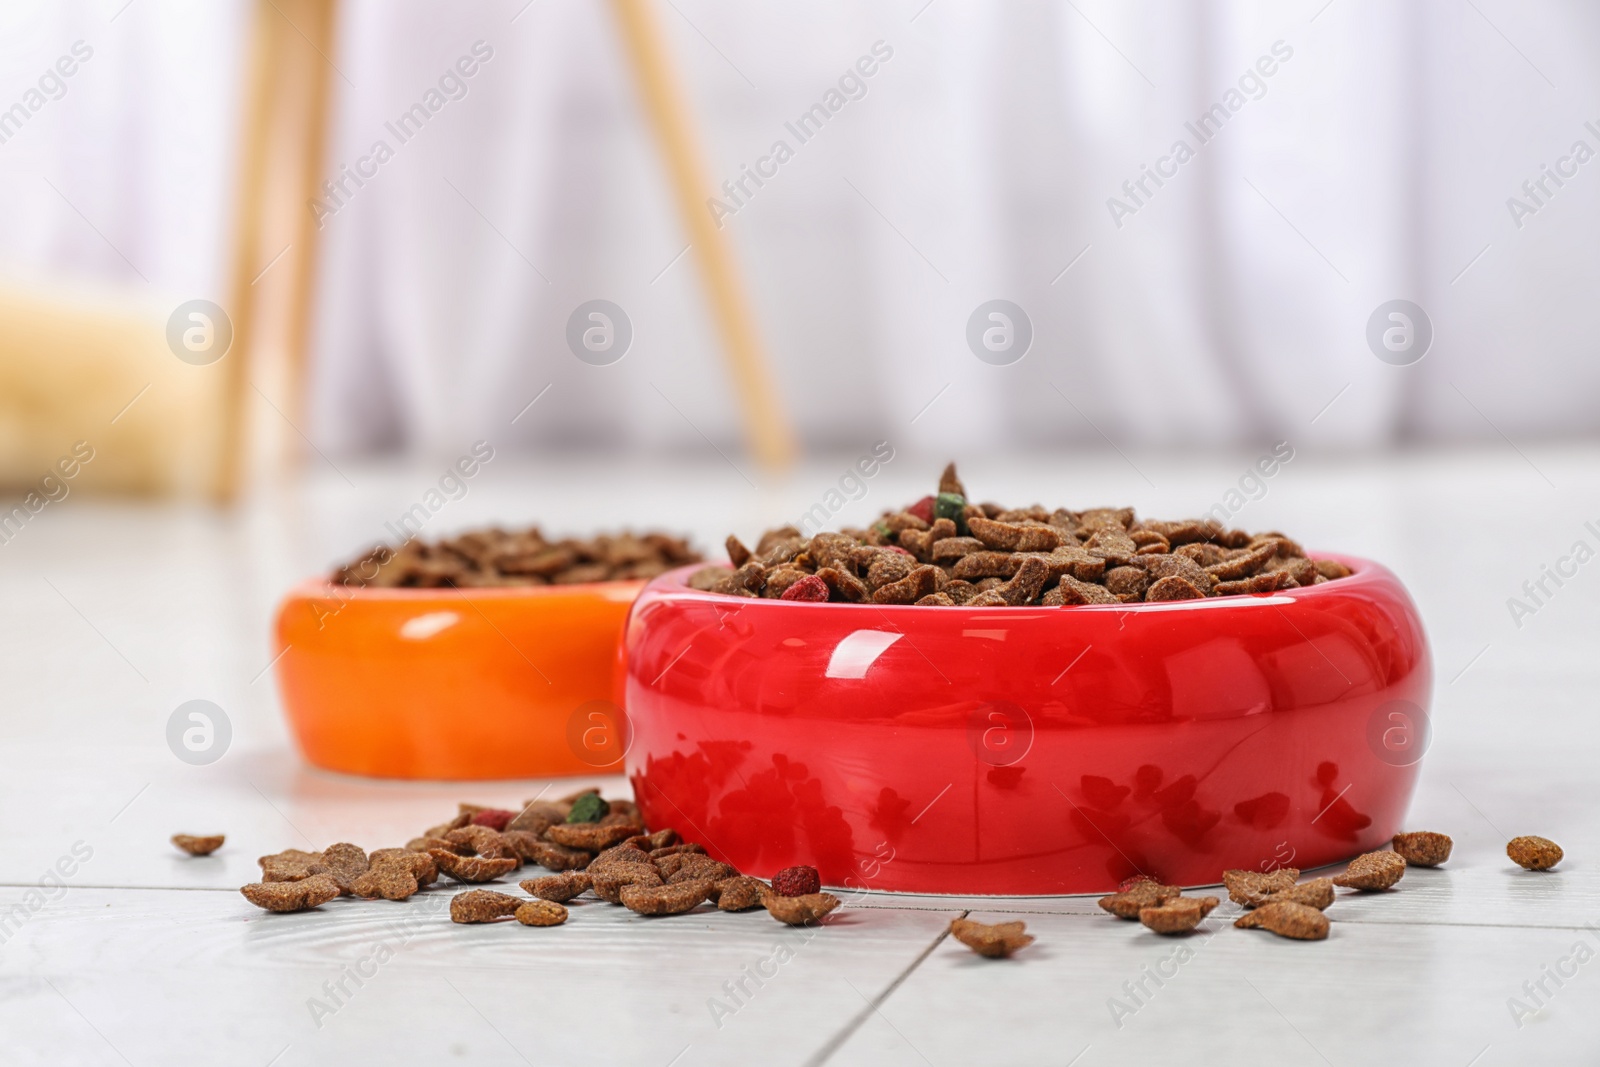 Photo of Bowls with food for cat and dog on floor. Pet care